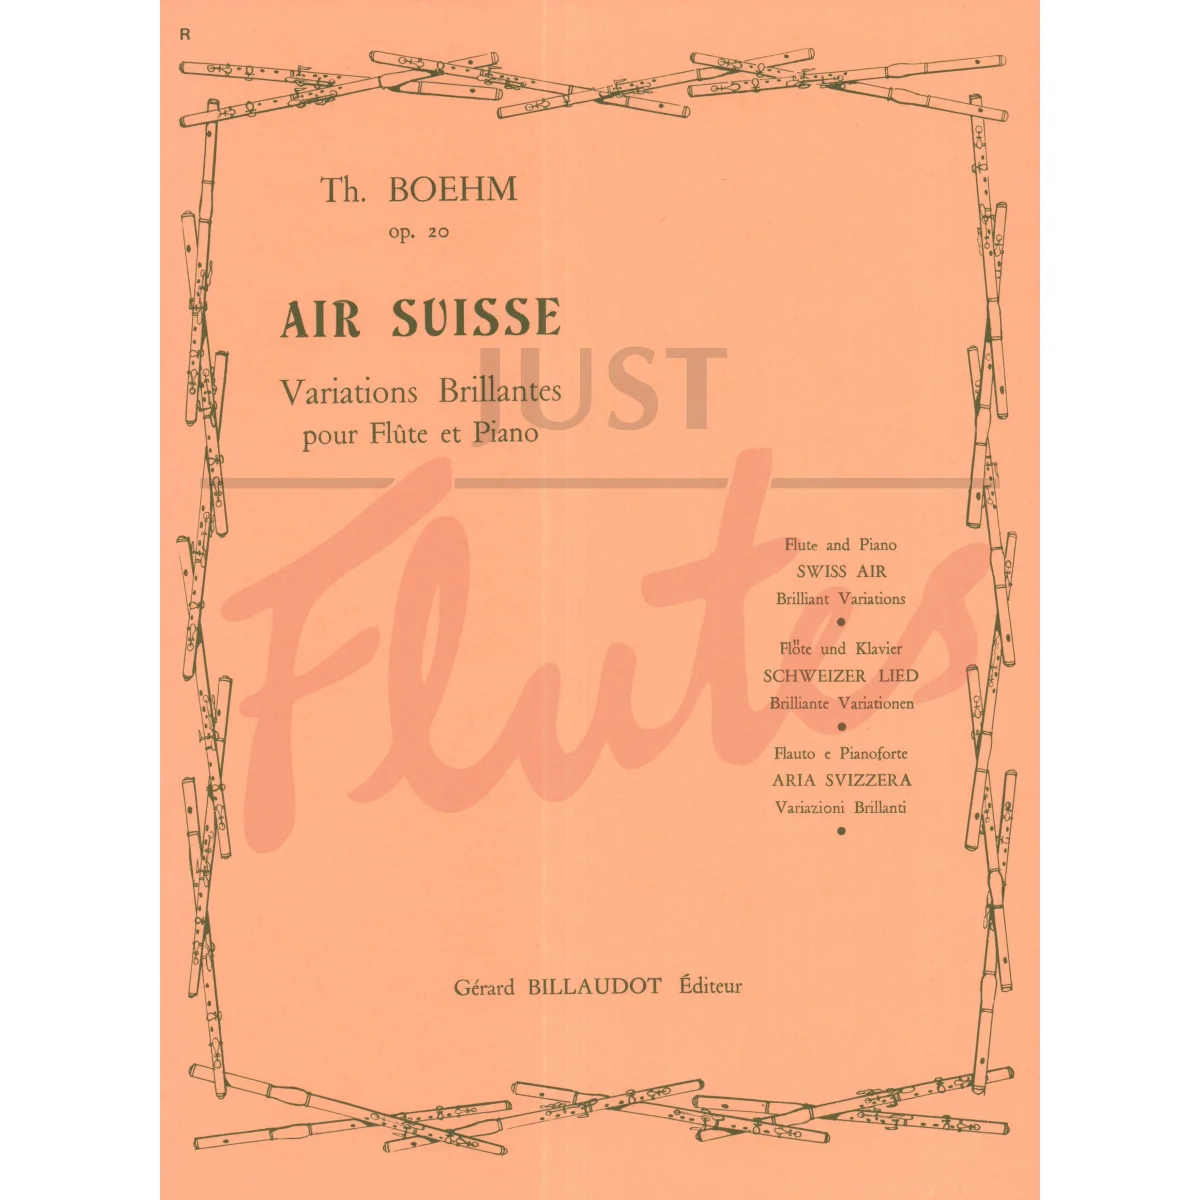 Air Suisse: Variations Brillantes for Flute and Piano